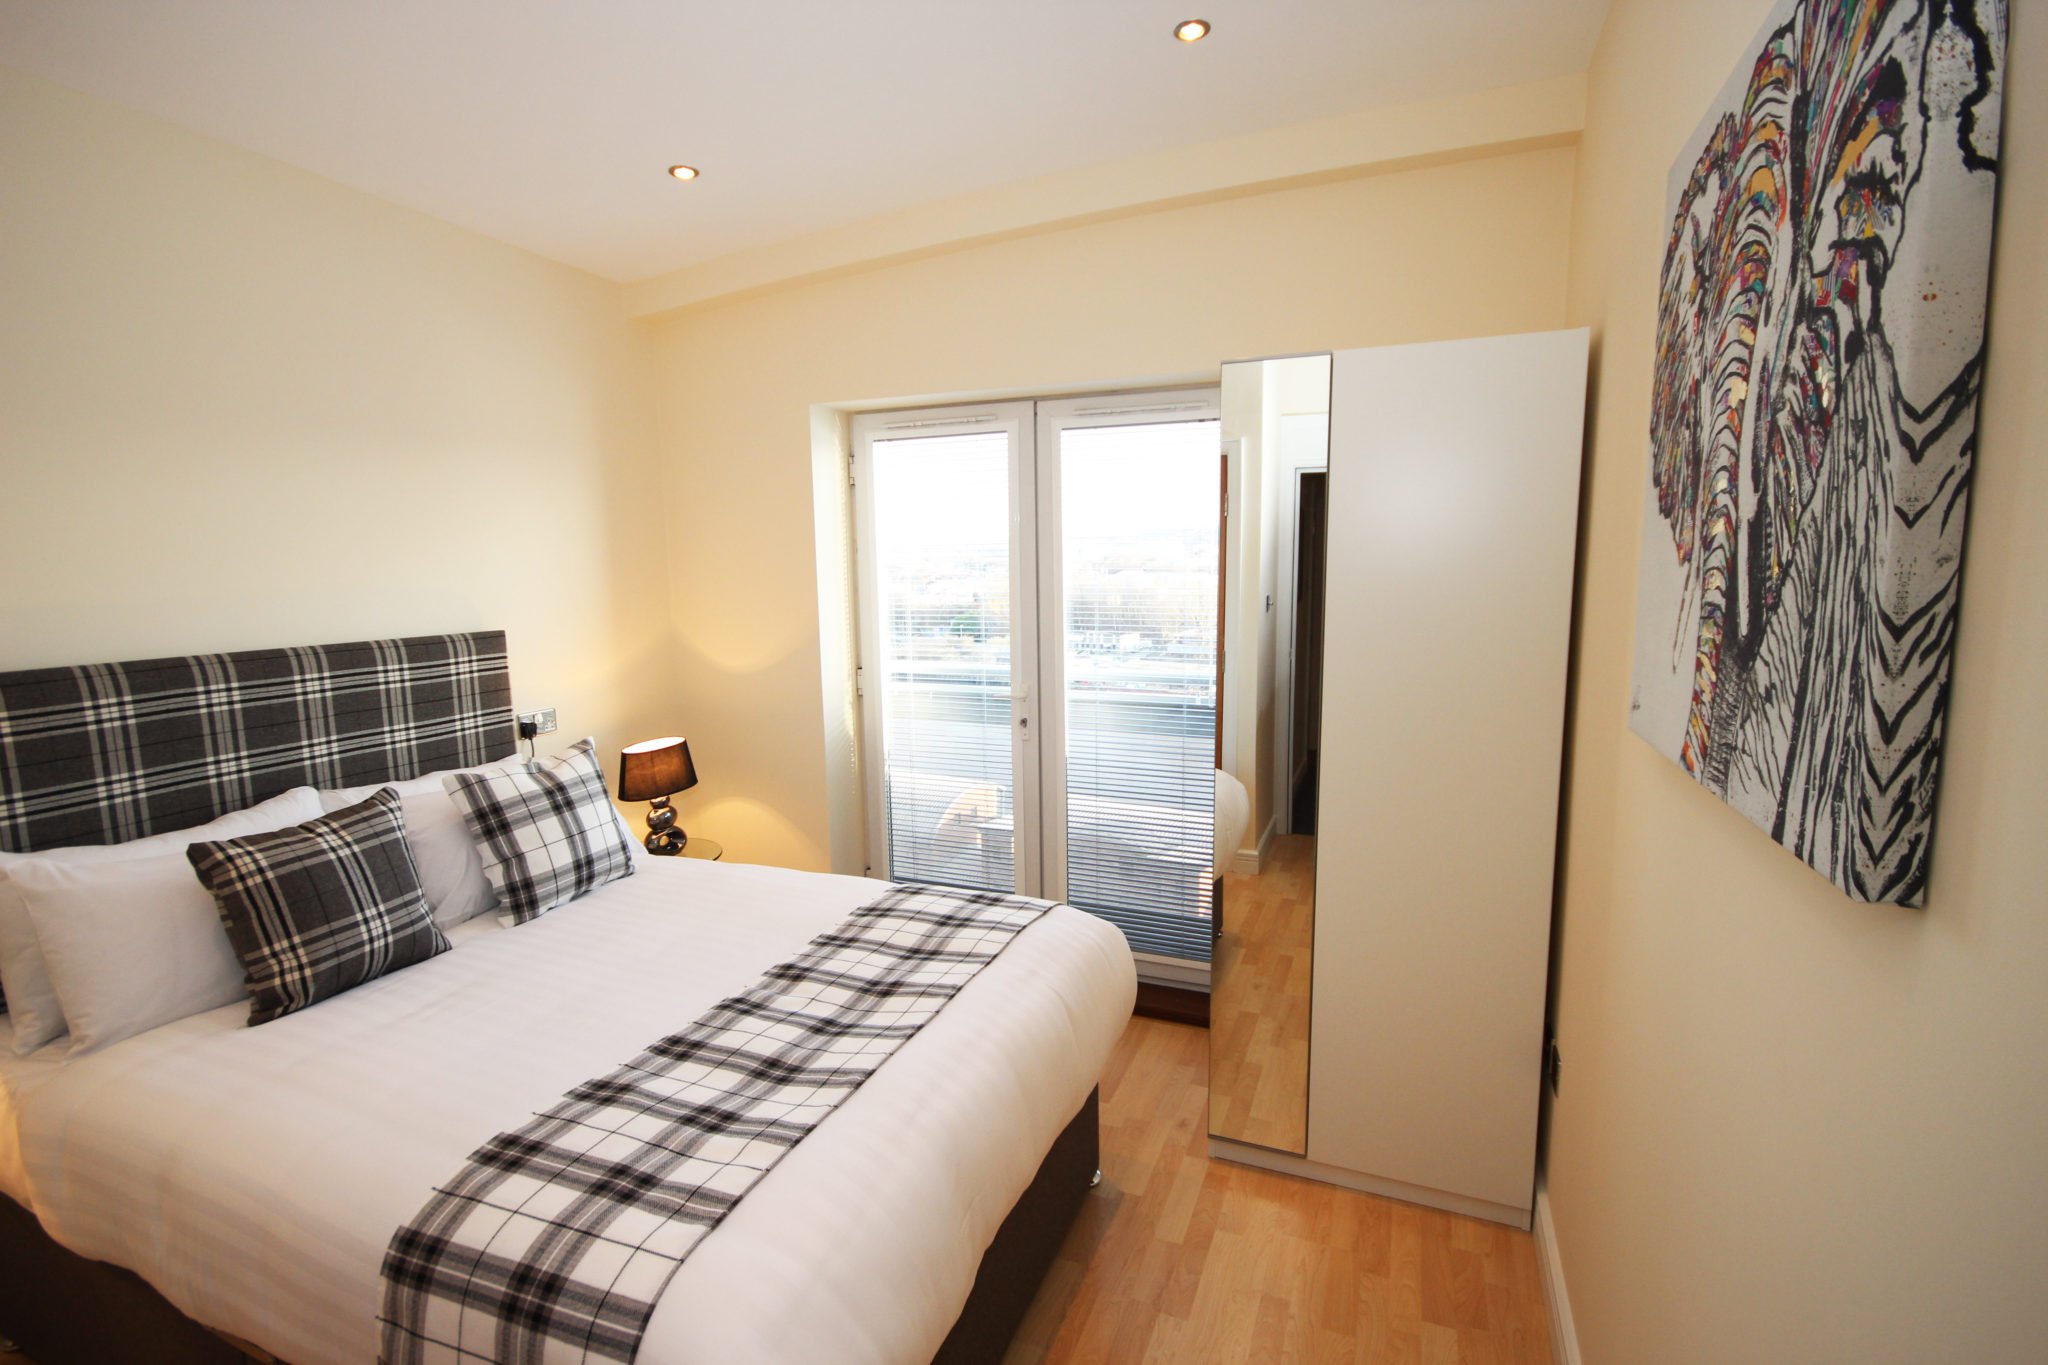 Short-Let-Apartments-Newcastle-UK-available-Now!-Book-Serviced-Accommodation-in-North-England-today-at-cheaper-than-a-Hotel!-Parking,-Wifi,-All-bills-incl!-Urban-Stay